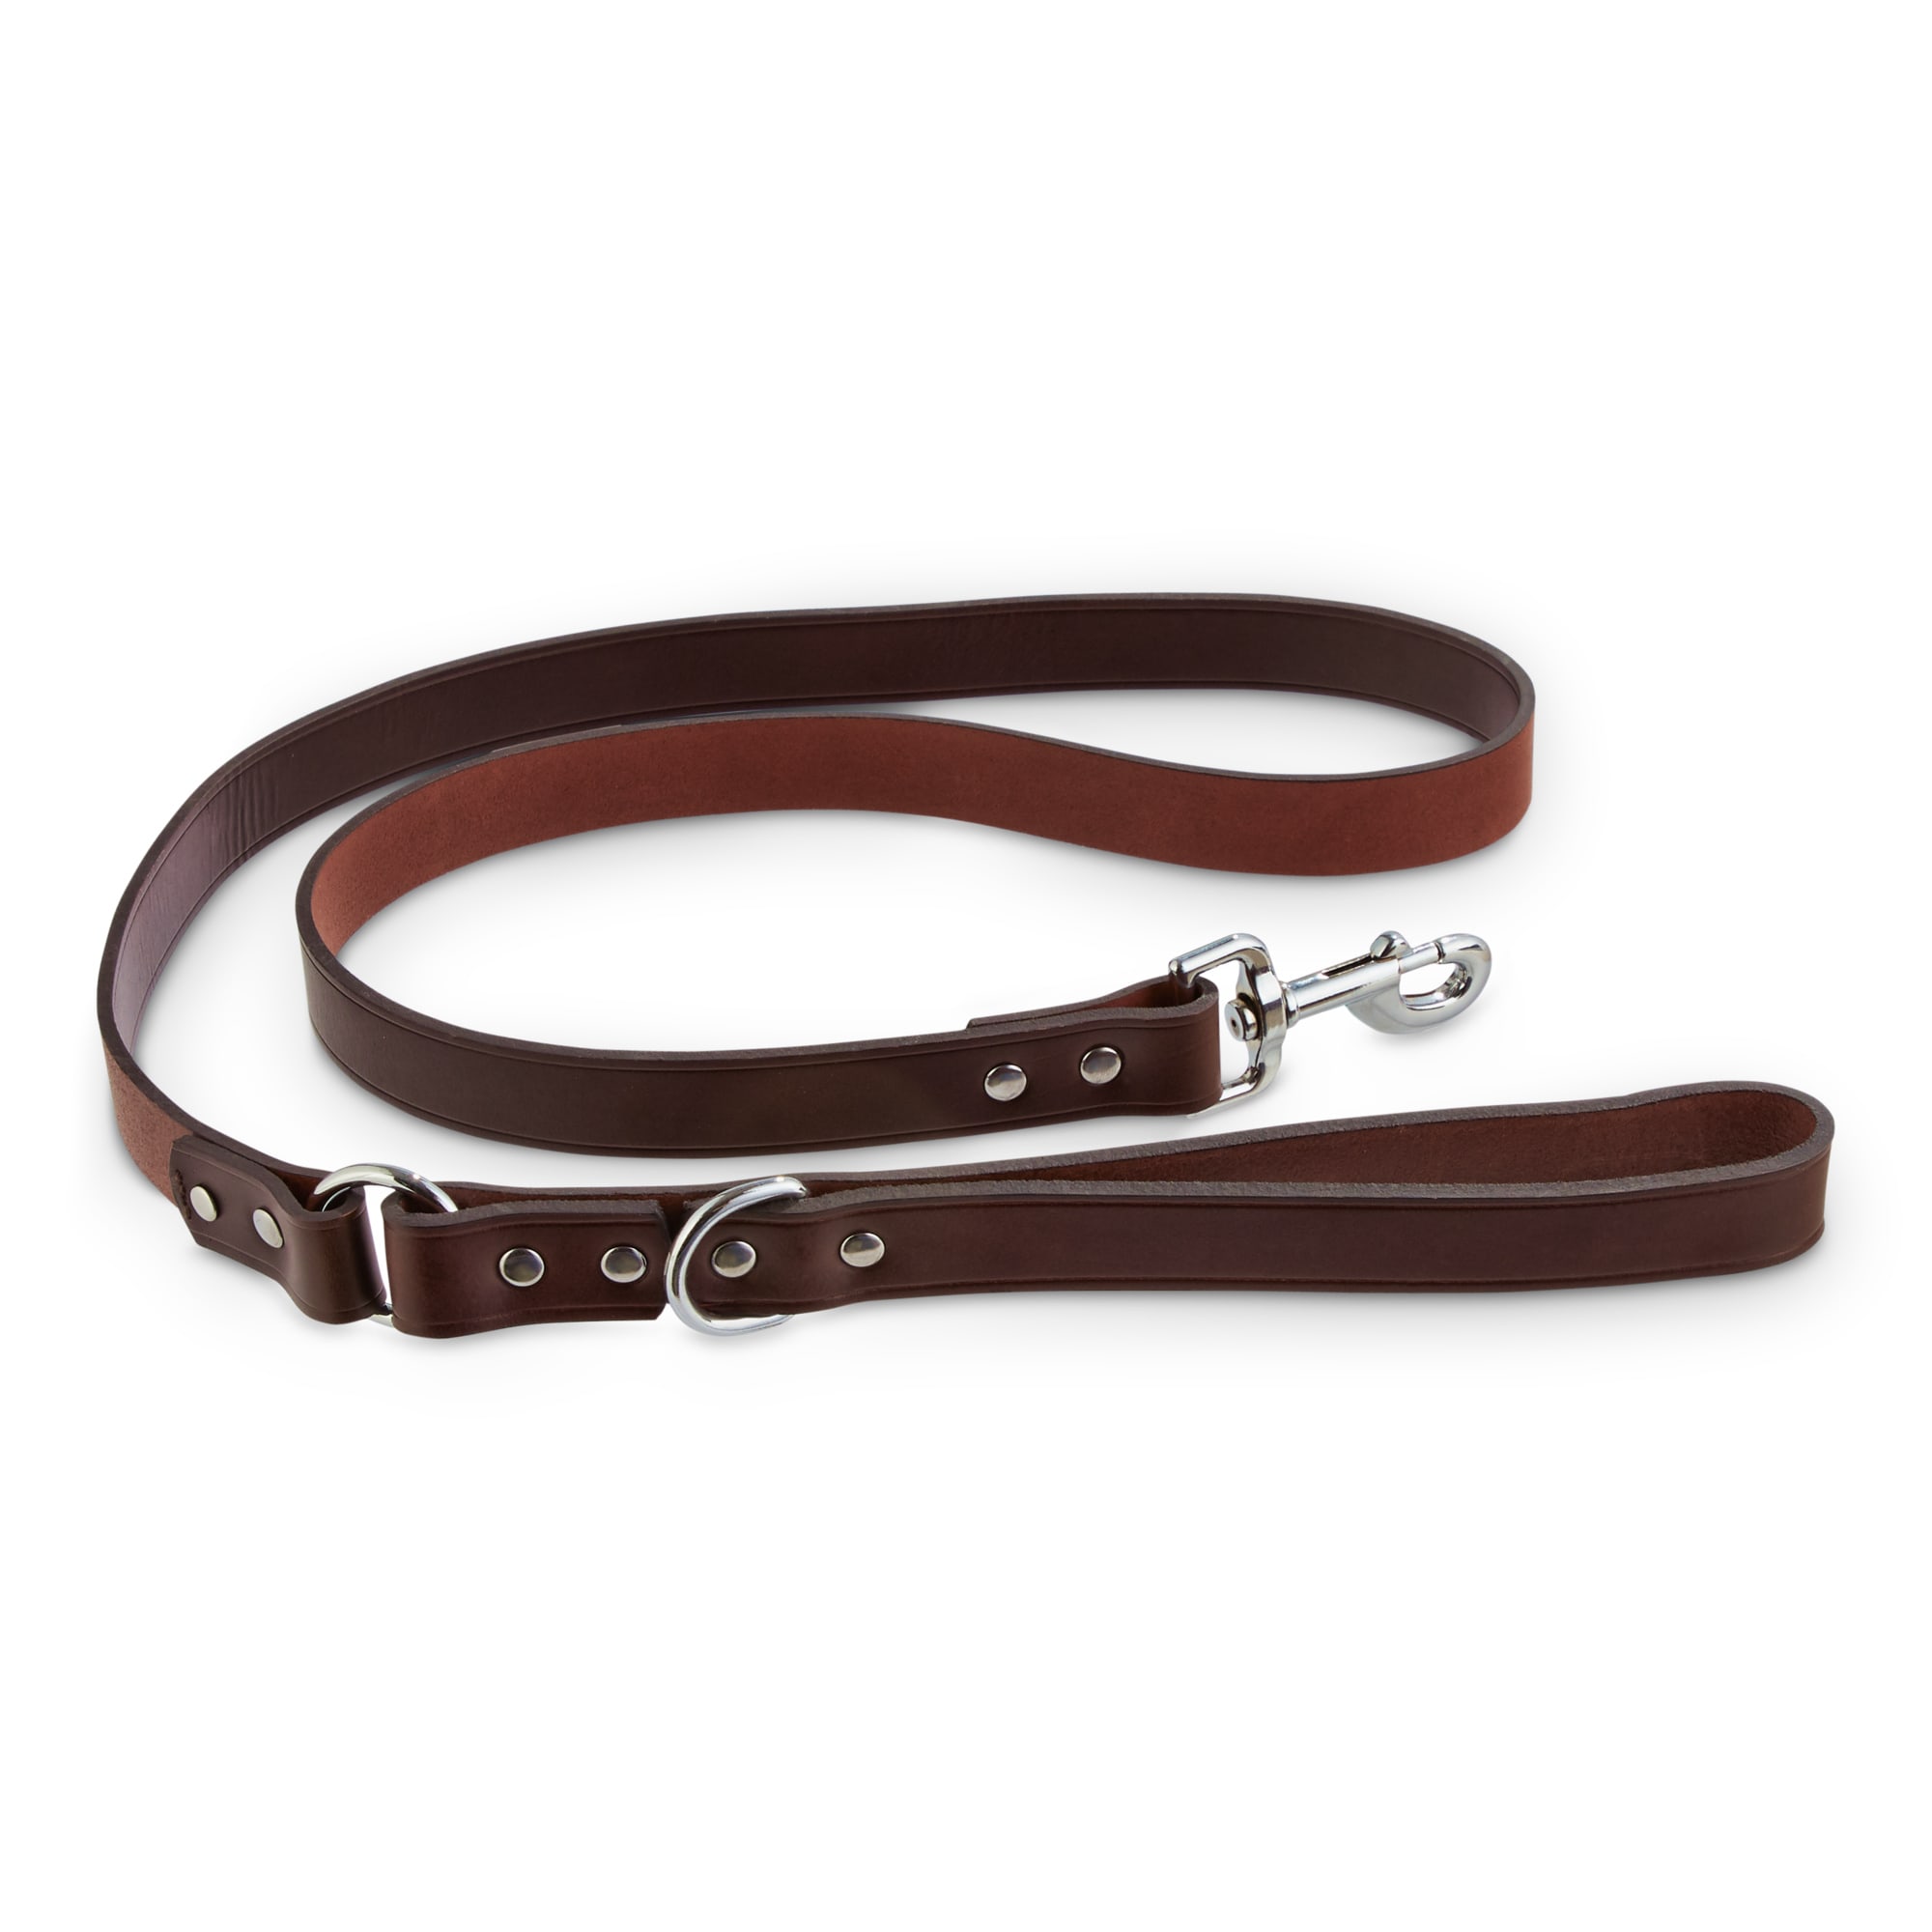 5ft Tan Size L Leather Leash leather Offers A Lifetime Of Durability Bond & Co 